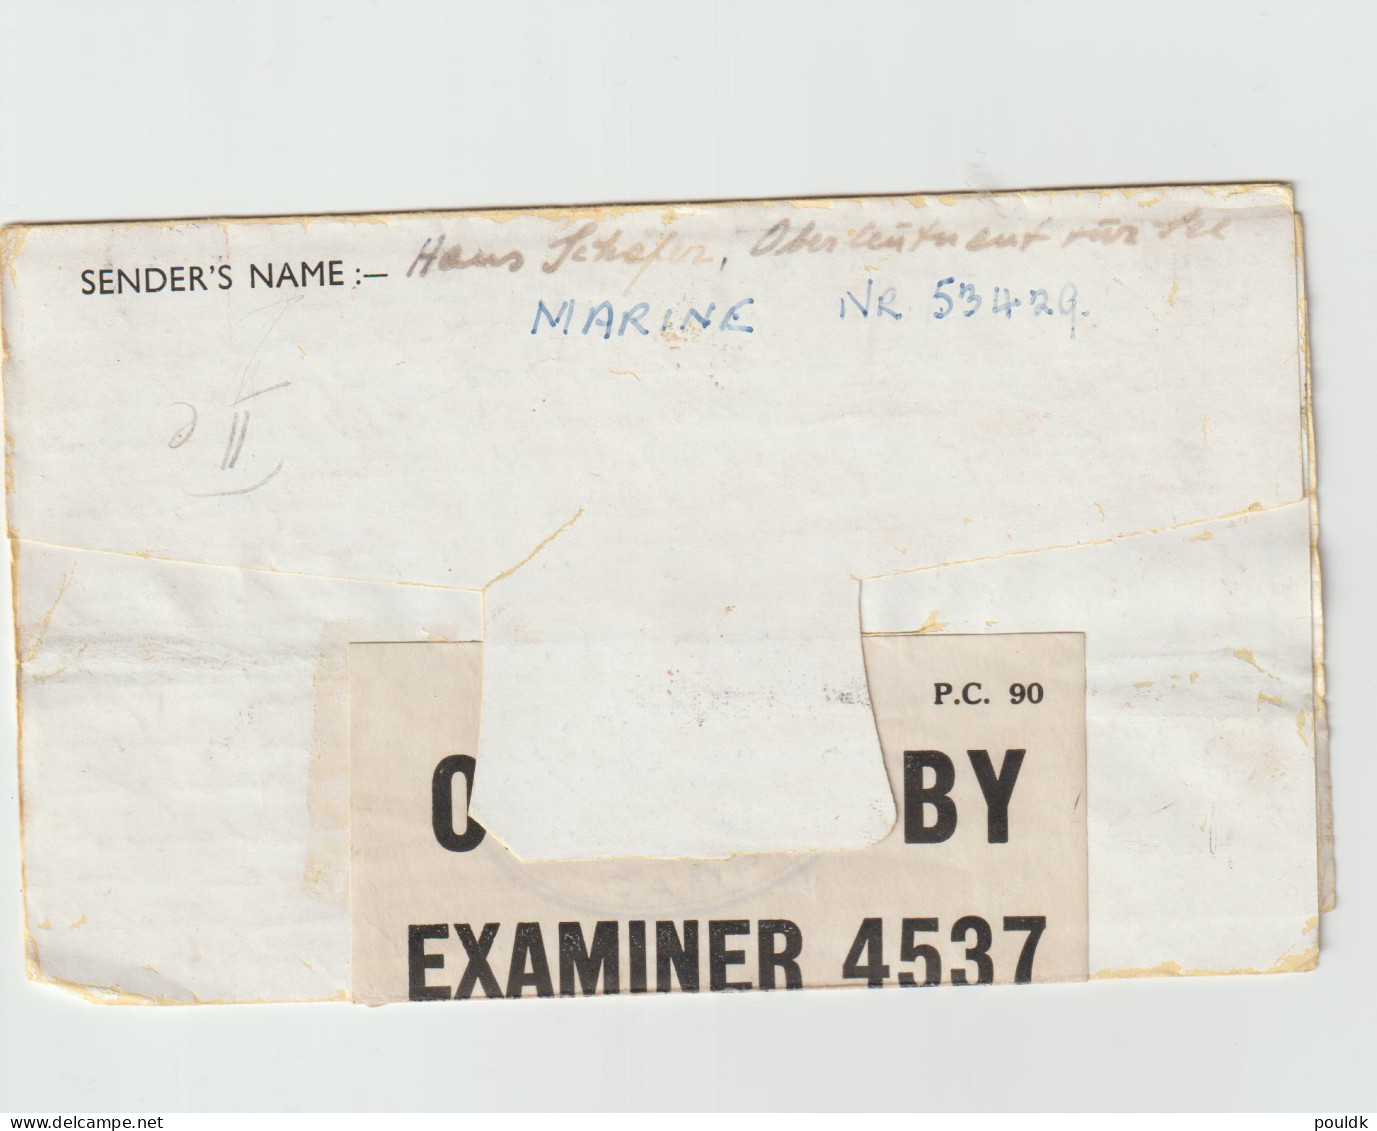 German Prisoner Of War Letter From Great Britain Censored And W/o Remarks Of Posting Address From Navy Officer - Militaria